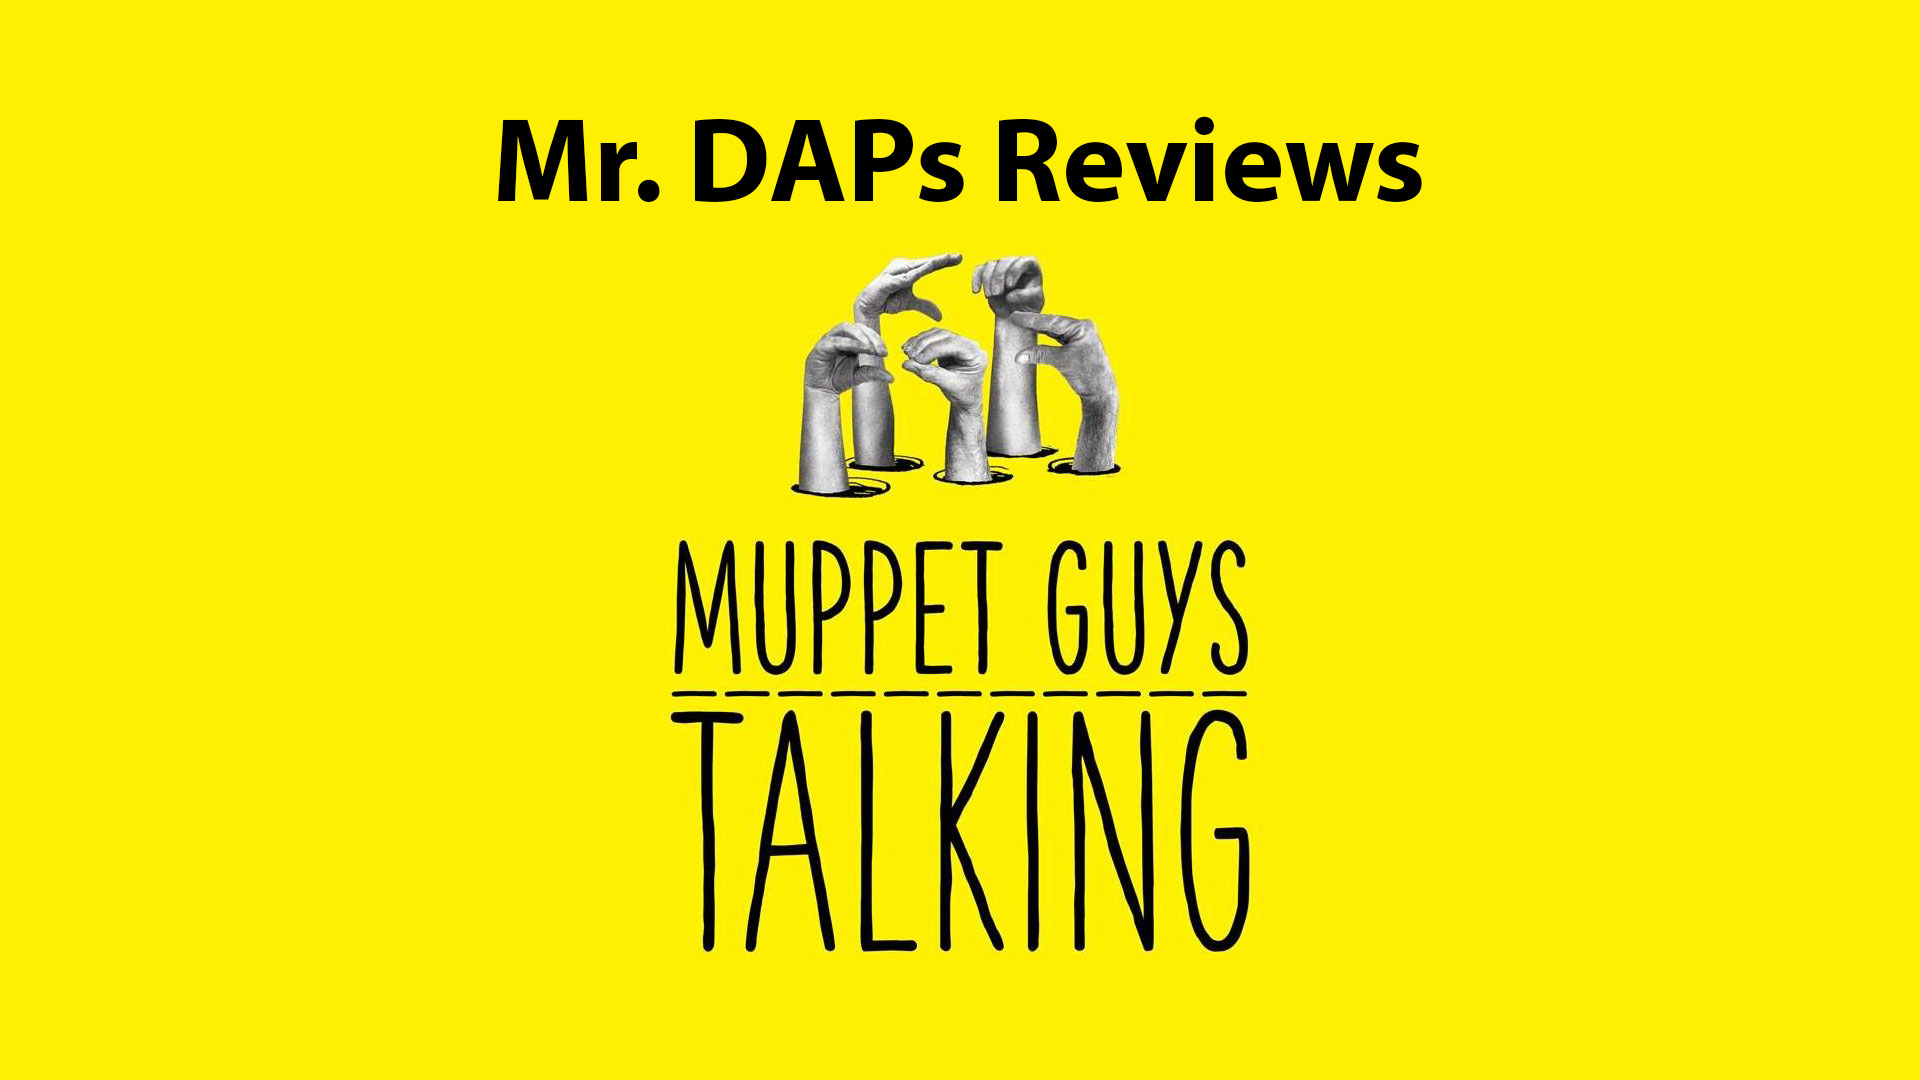 Muppet Guys Talking Shares the Magic Behind The Muppets! – Review by Mr. DAPs